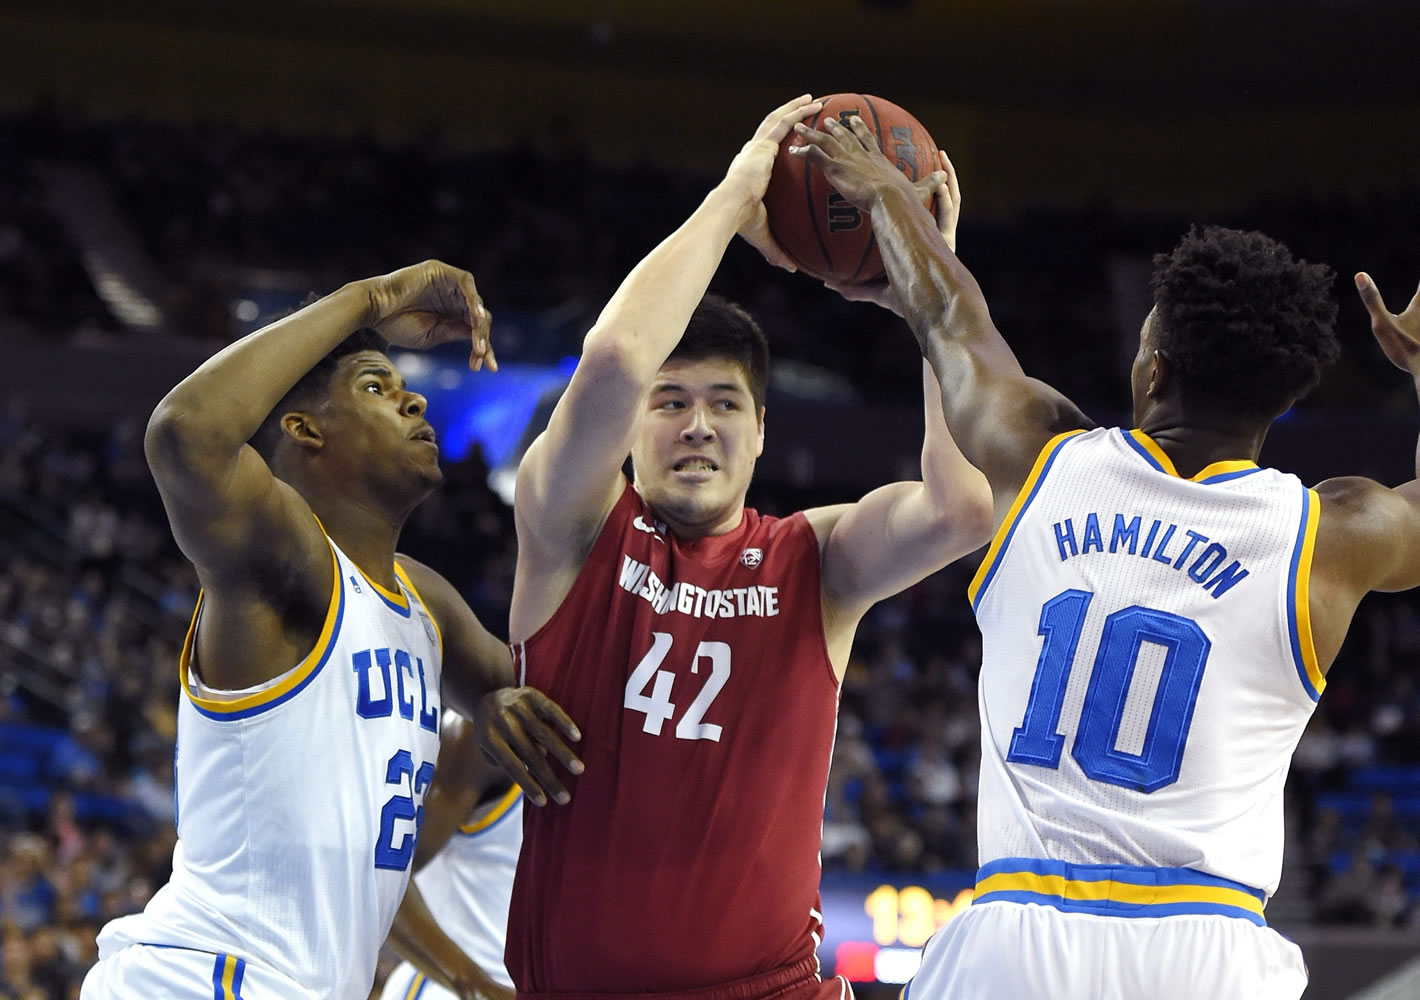 Washington State center Conor Clifford, center, tries to pass under pressure from UCLA forward Tony Parker, left, and guard Isaac Hamilton during the first half of an NCAA college basketball game Saturday, Jan. 30, 2016, in Los Angeles. (AP Photo/Mark J.